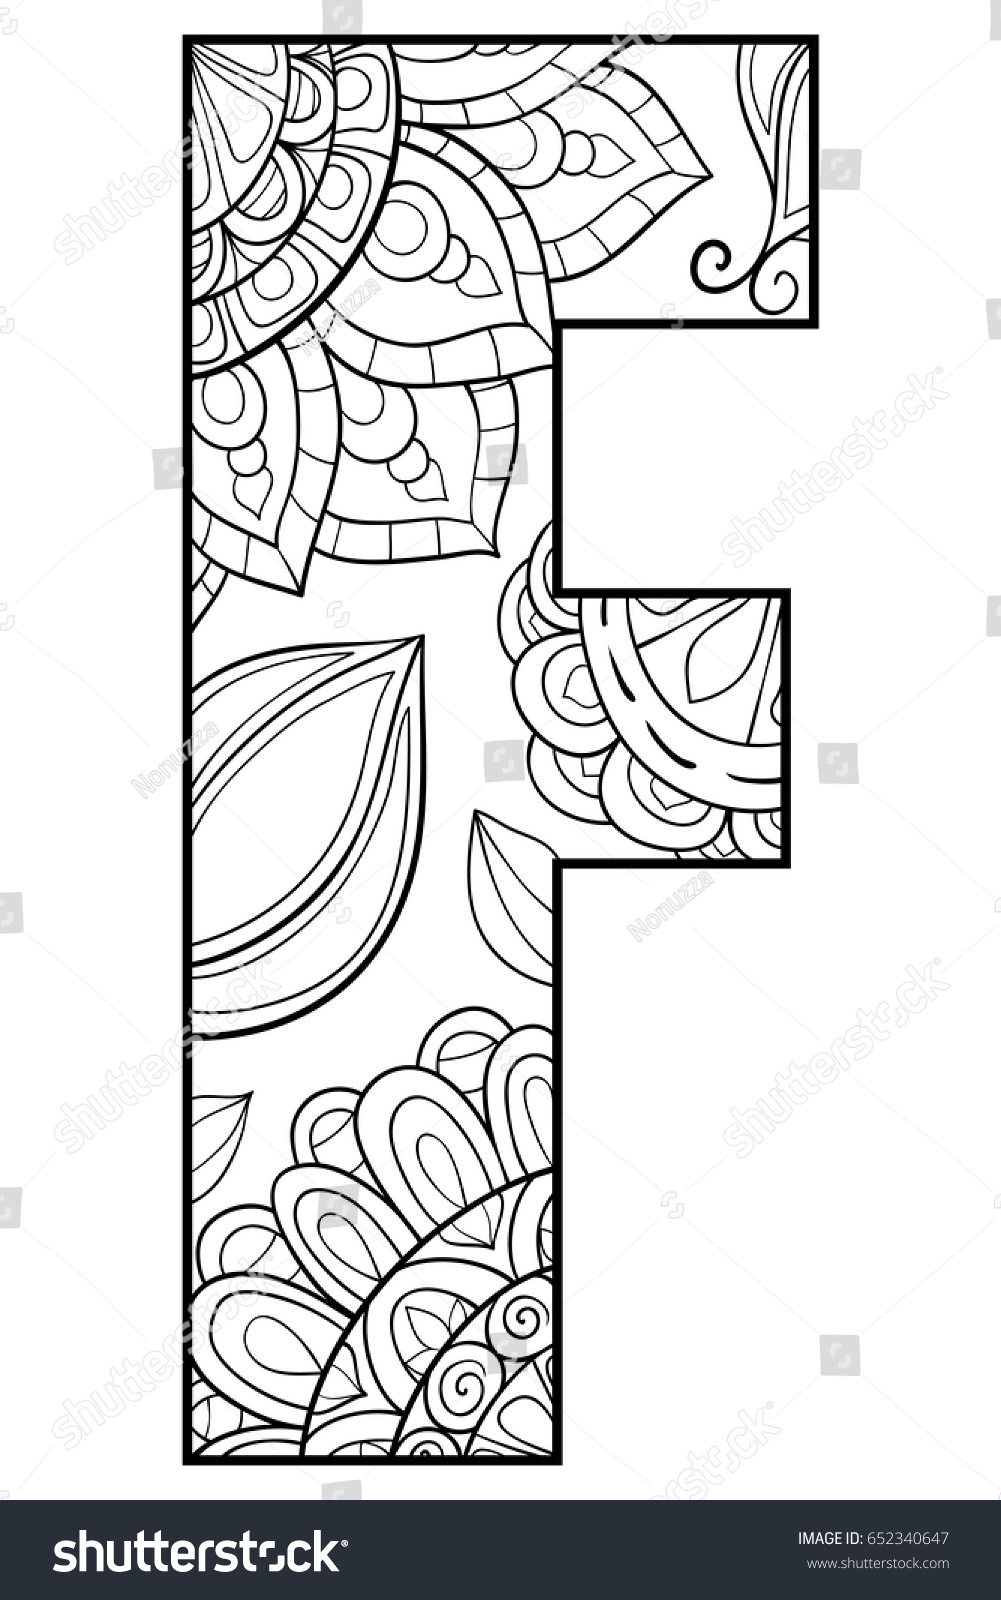 Adult Coloring Page Letter Alphabet Art Stock Vector ...